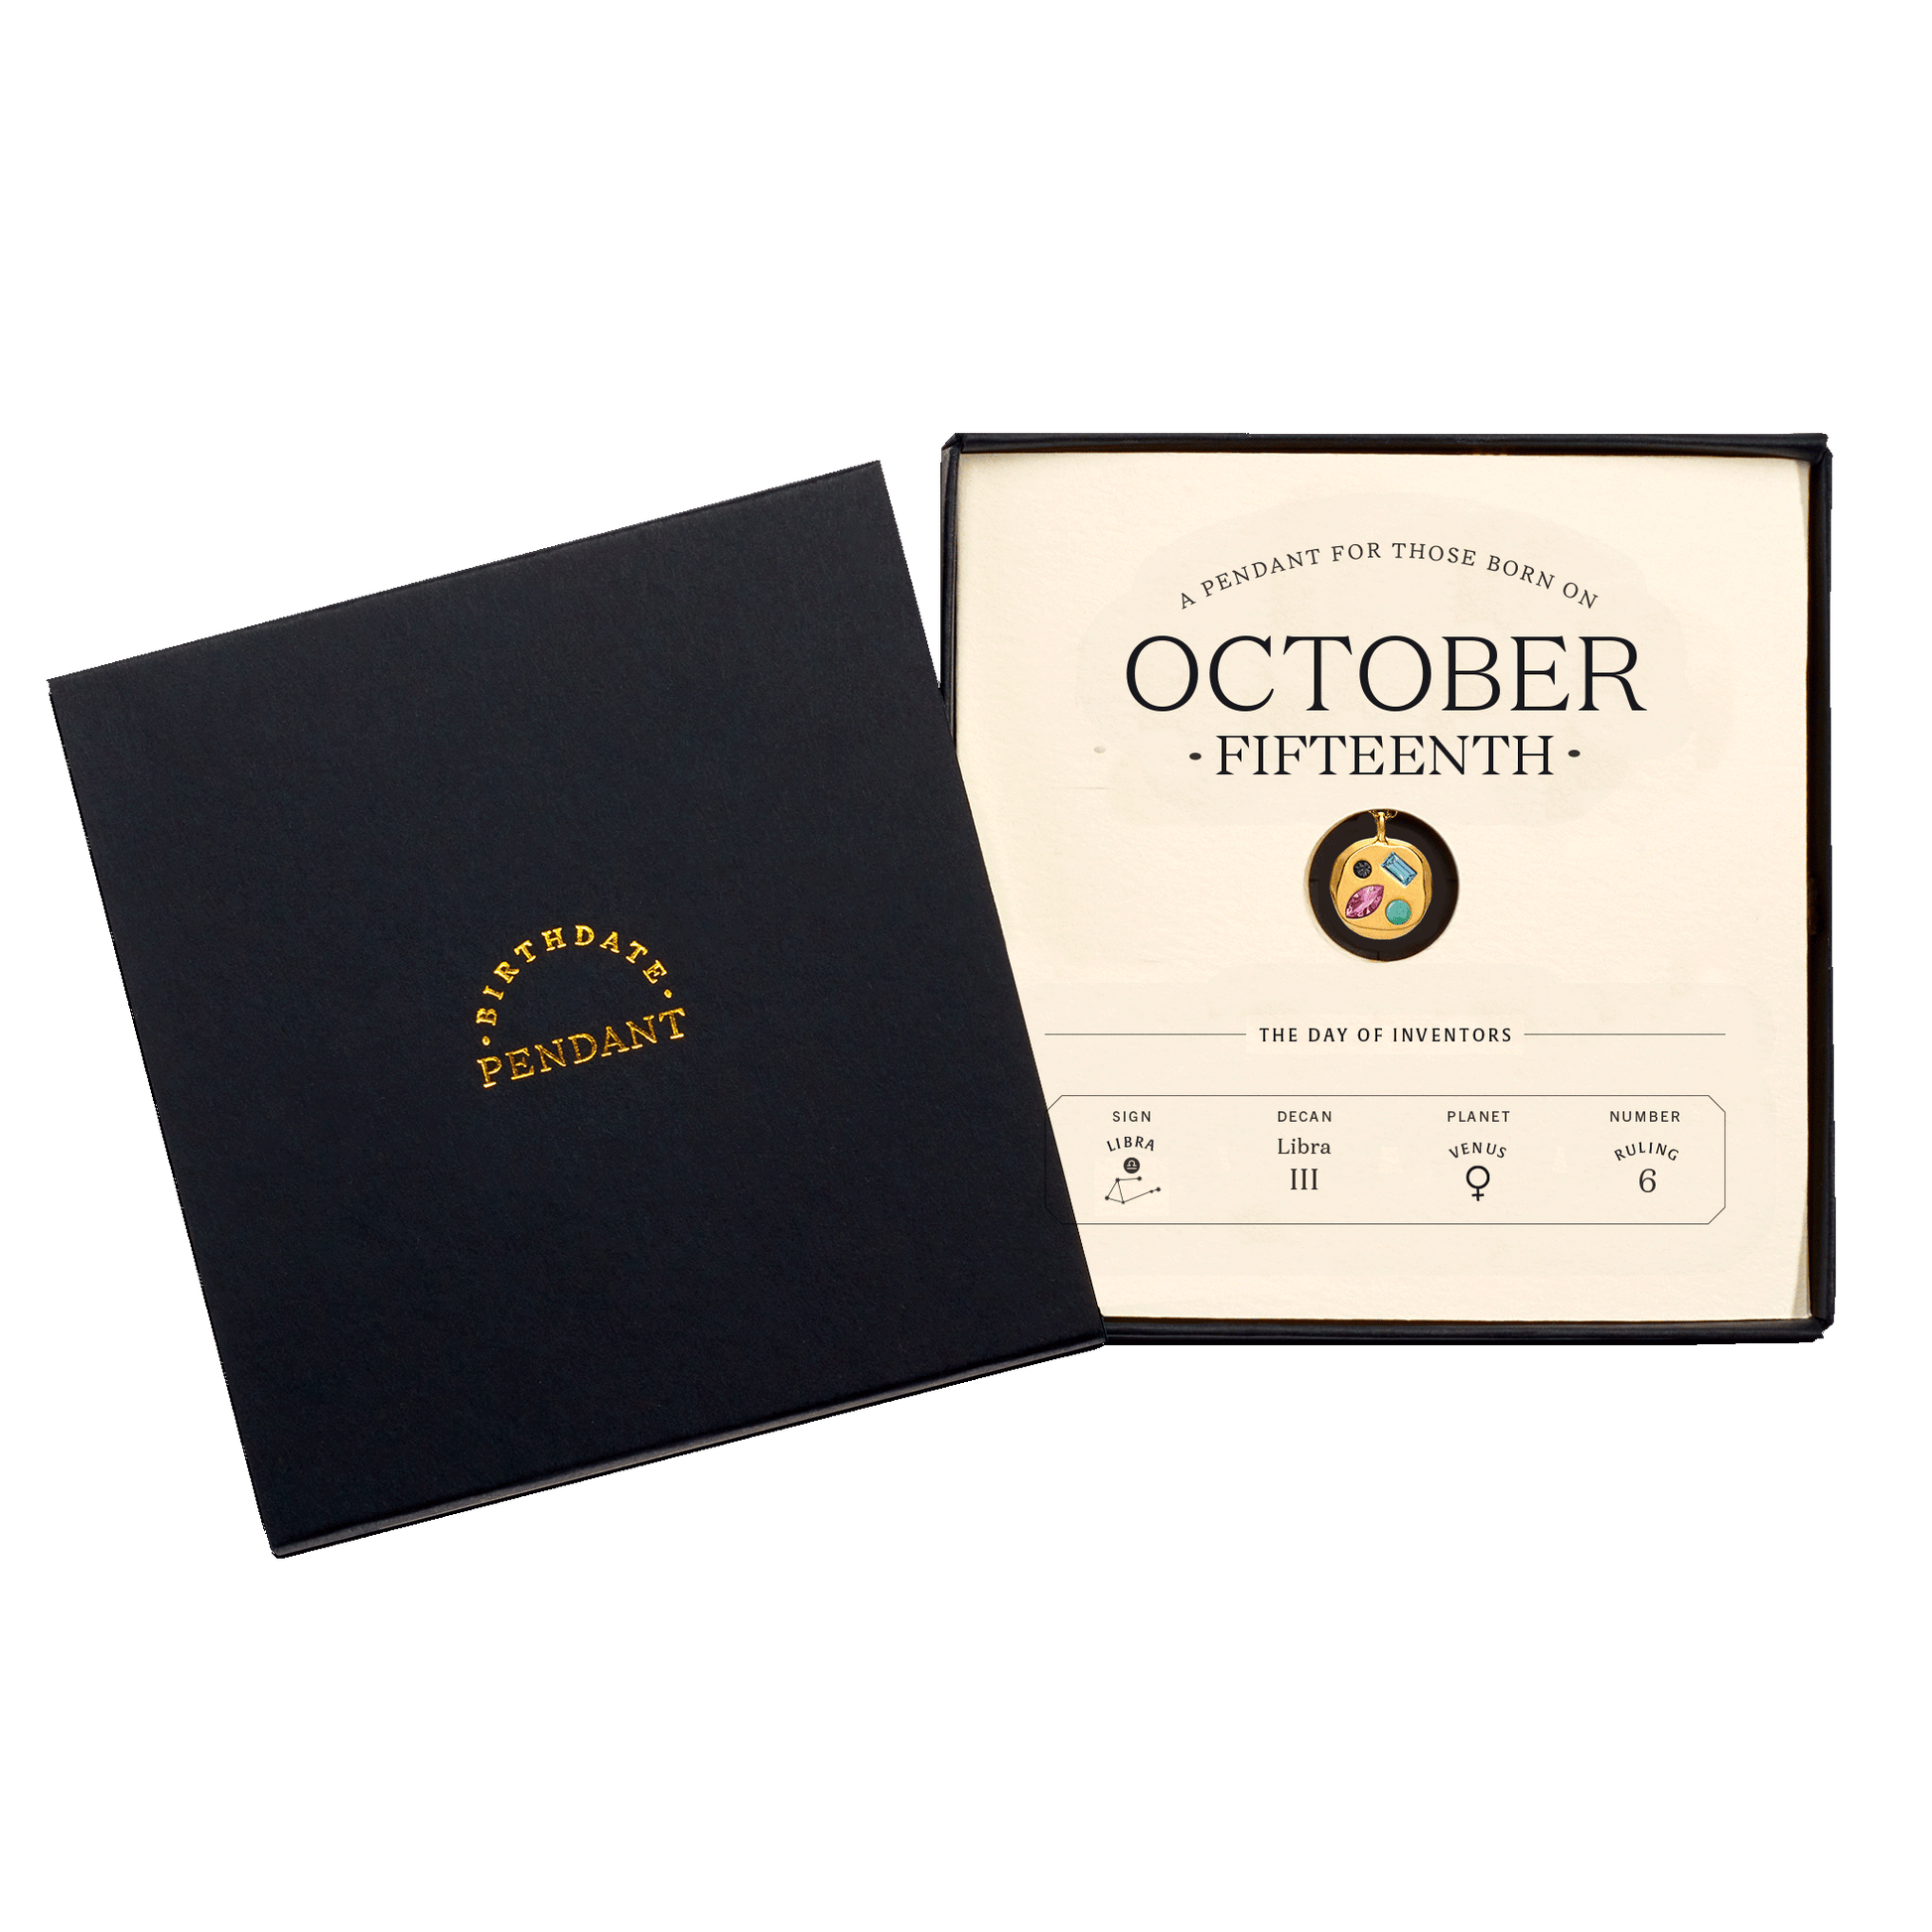 The October Fifteenth Pendant inside its box